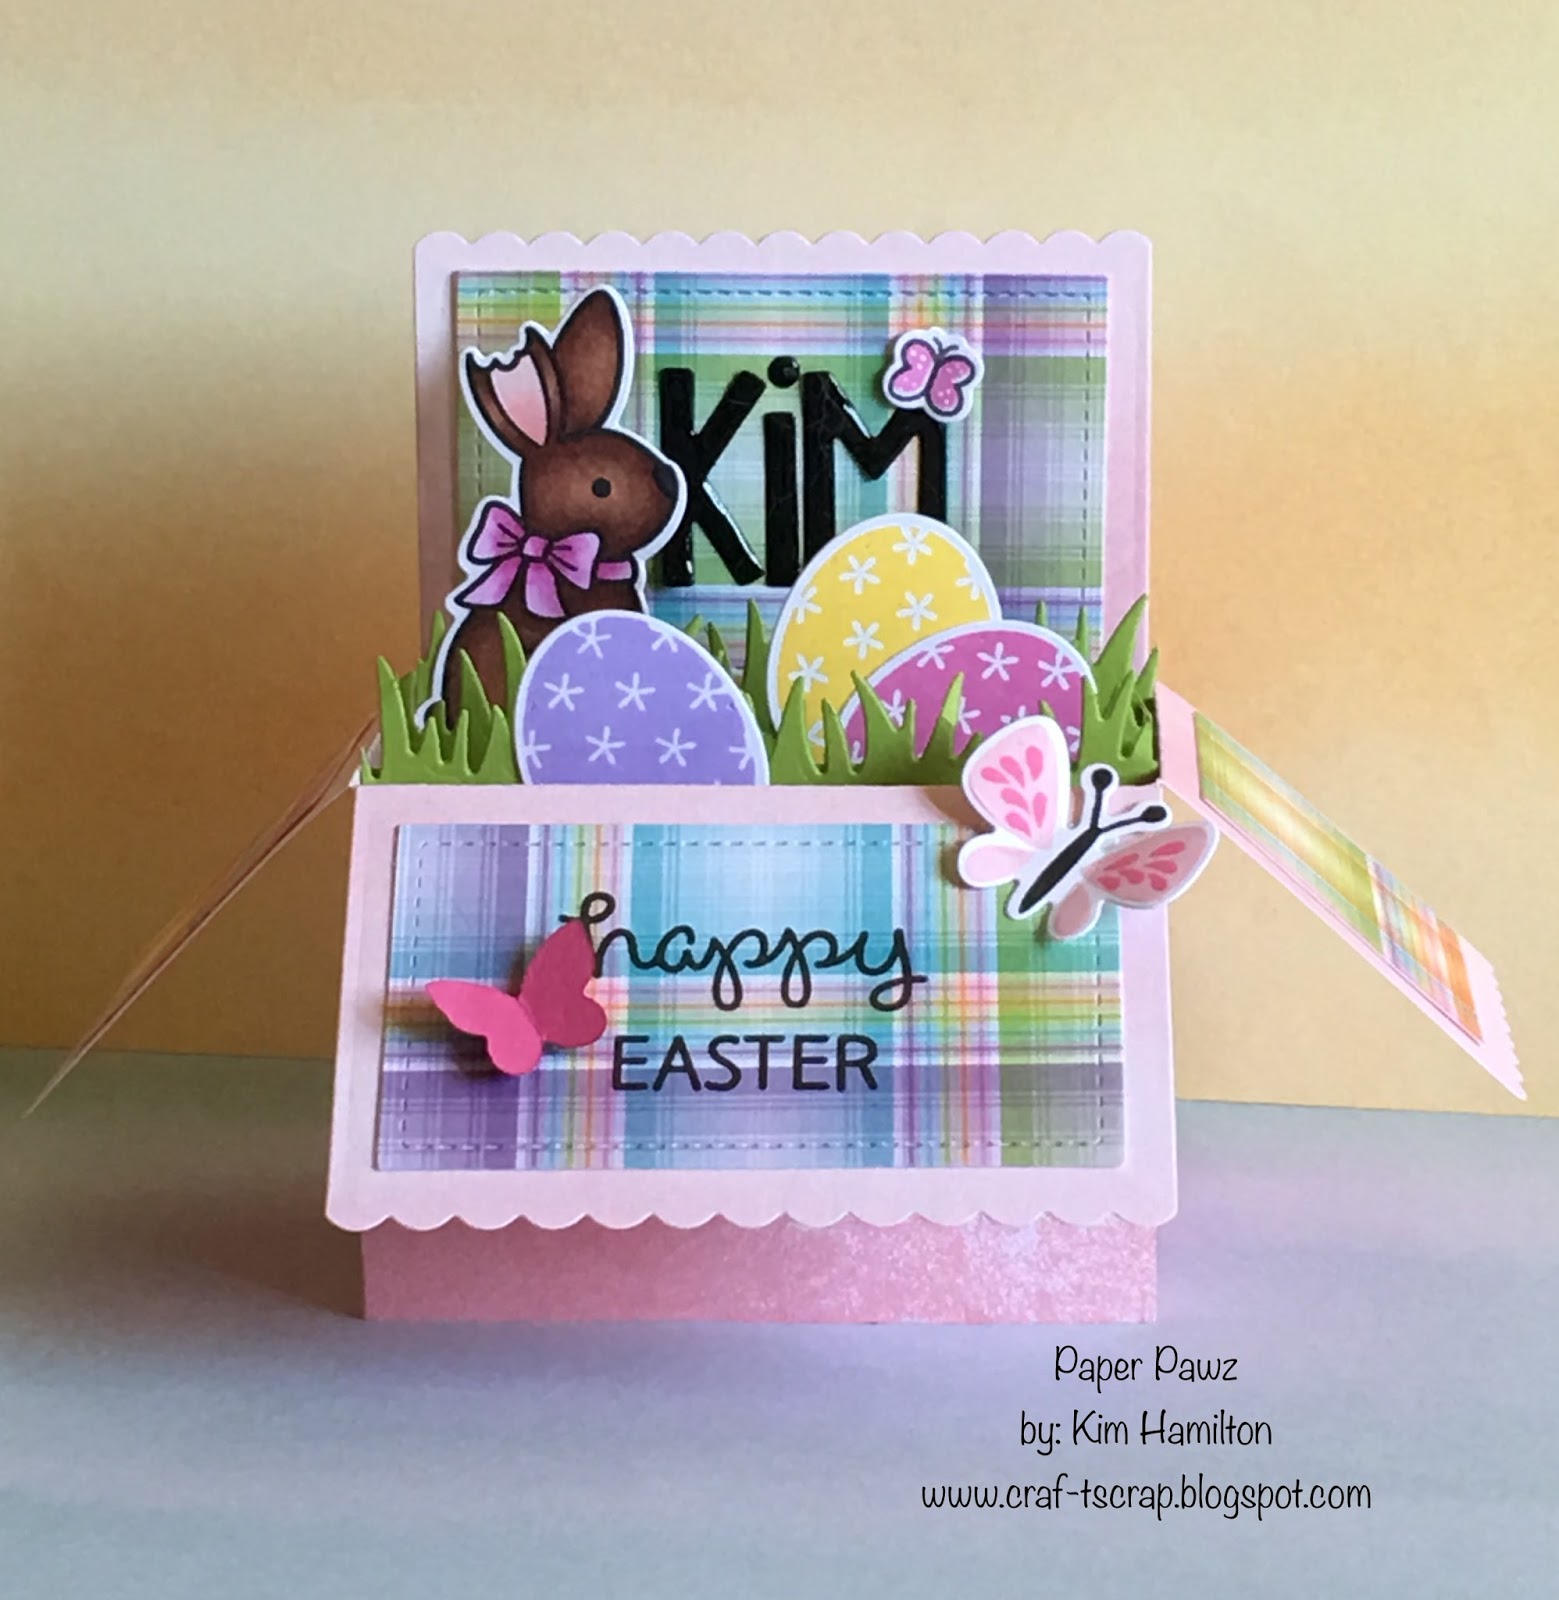 paper-pawz-interactive-easter-place-cards-with-lawn-fawn